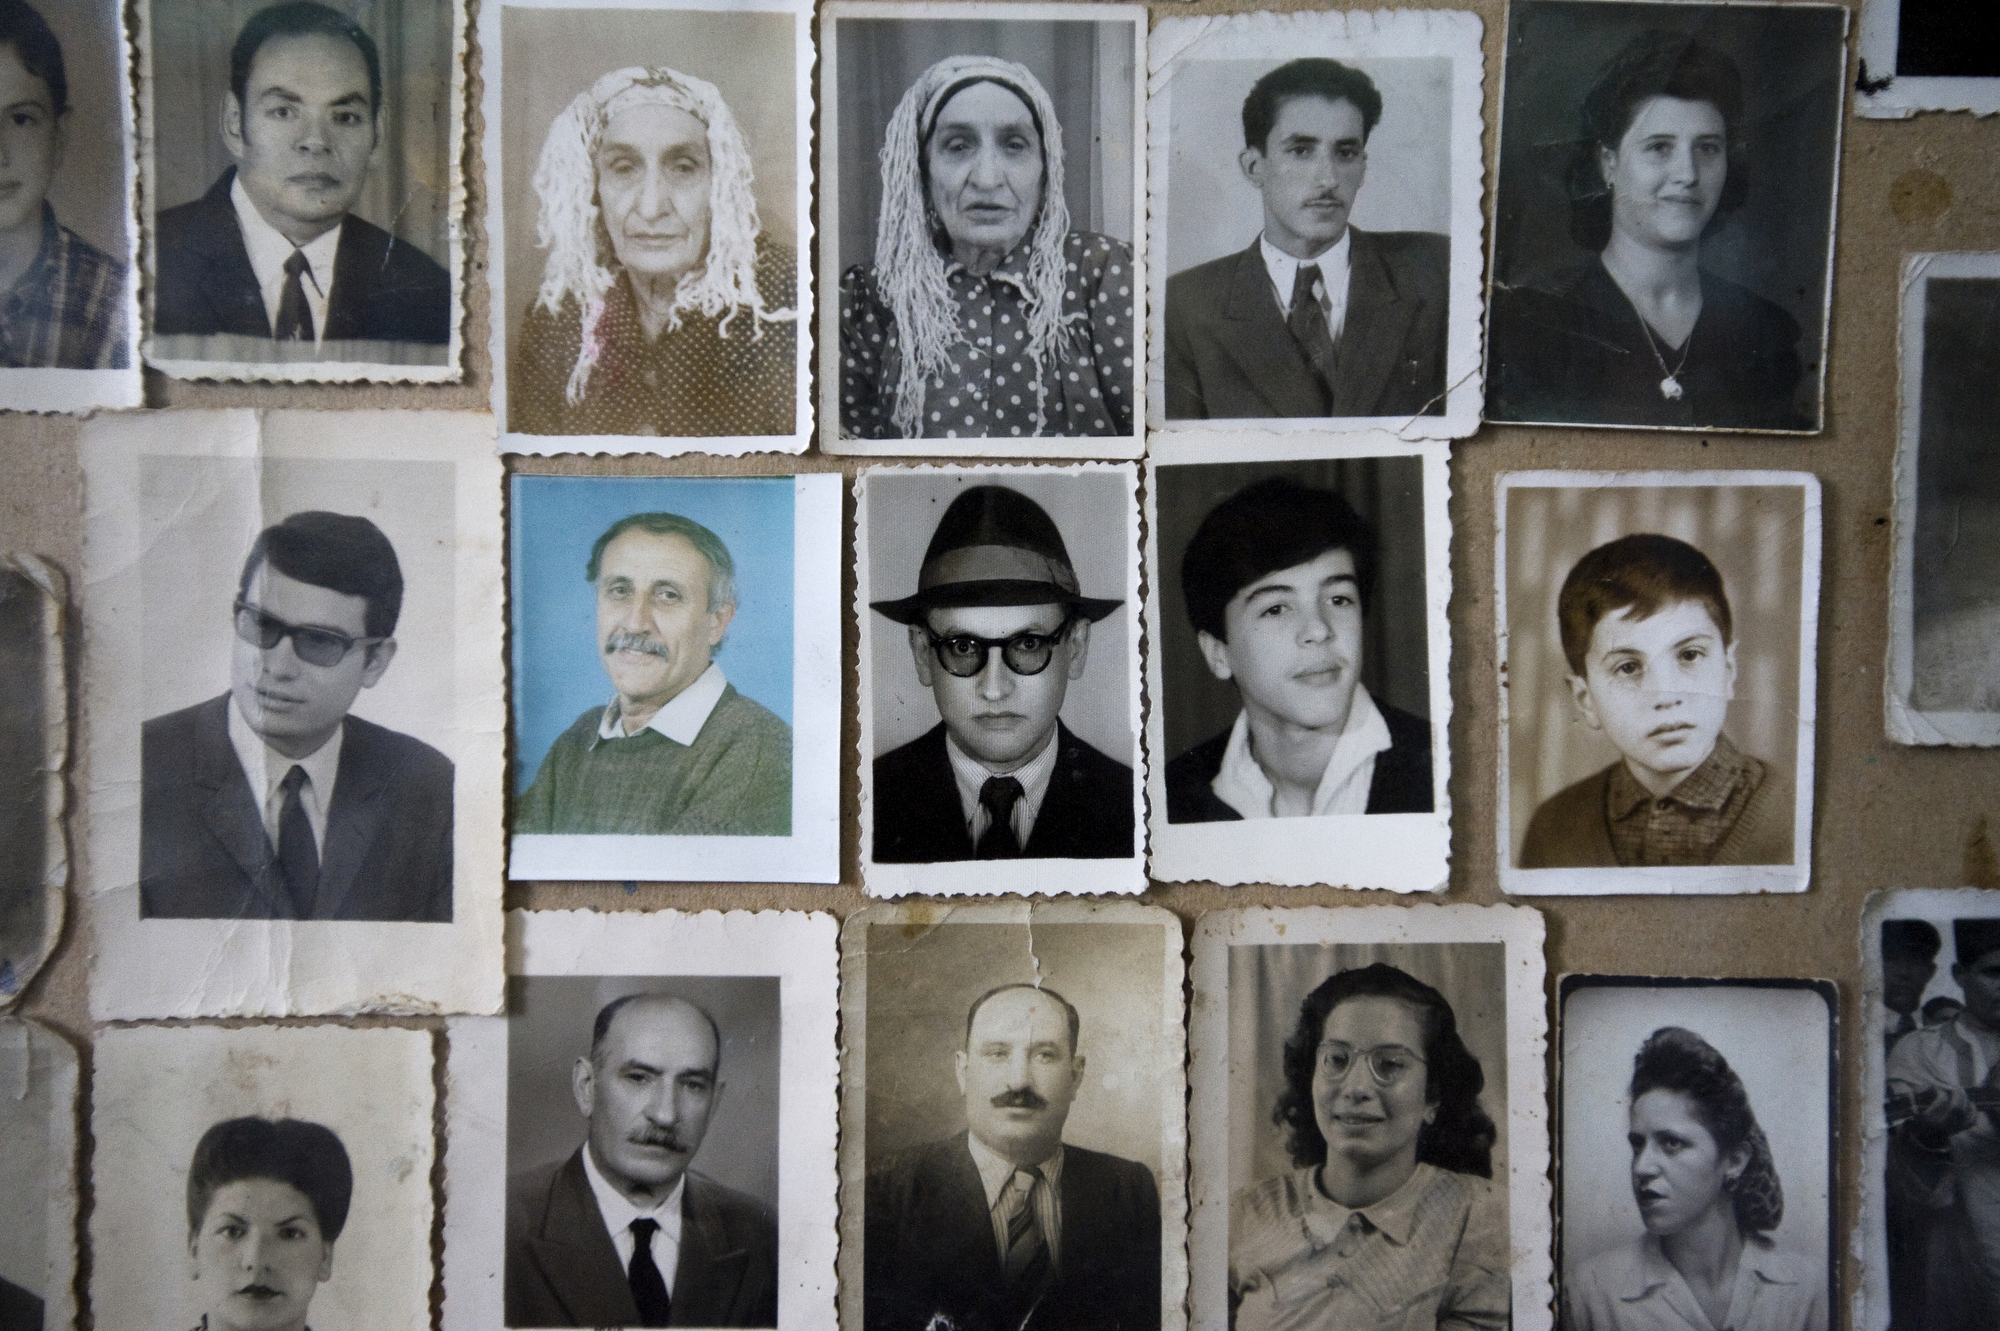 A collection of head shots of former Jewish residents of Fez are displayed in a small museum located in the Jewish Cemetery. Fez was the first city in Morocco with a mellah or Jewish quarter which was established in 1438 adjacent to the Royal Palace. (Photo: Aaron Vincent Elkaim)